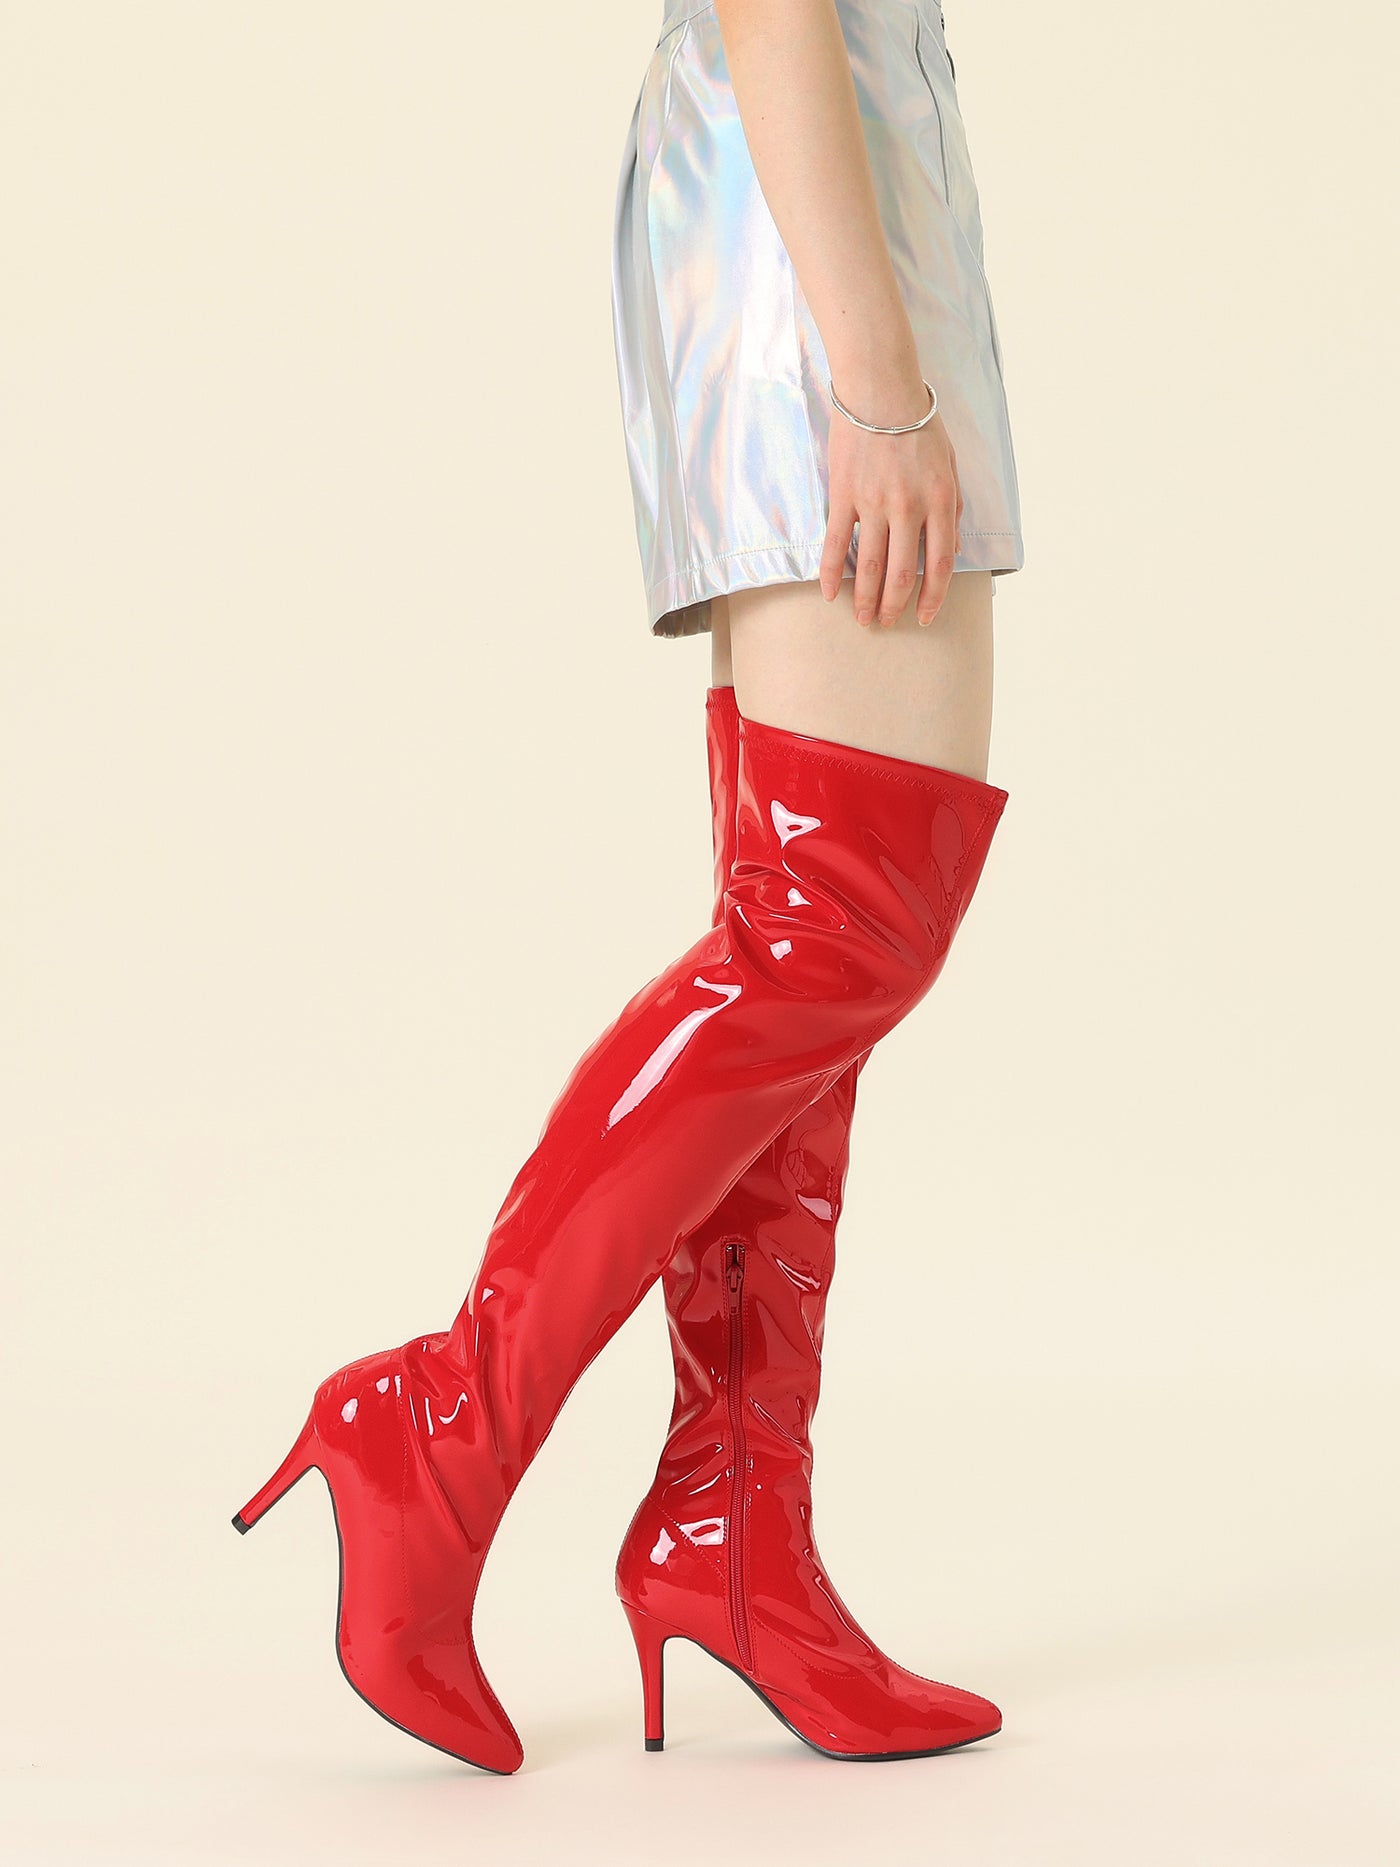 Allegra K Pointed Toe Stiletto Heel Over The Knee High Boots